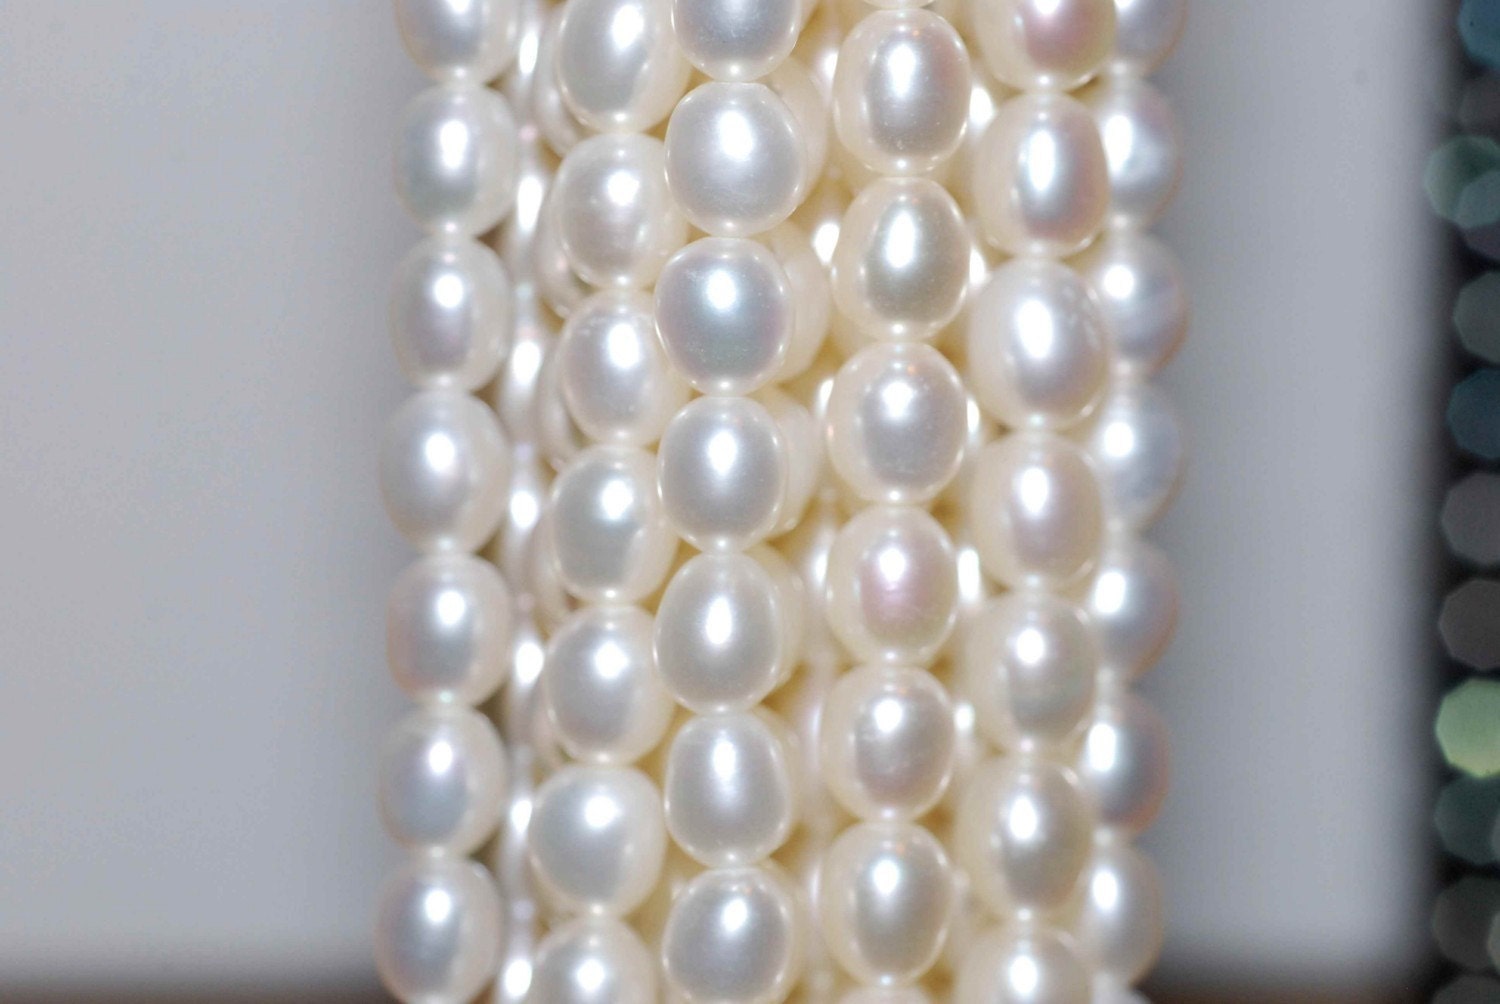 14 Inch 6-7mm Natural Freshwater Pearl Bead Strand, About 65 Beads, Ivory  White, Round Potato Shape, White Pearl Beads, Beach Jewelry Making